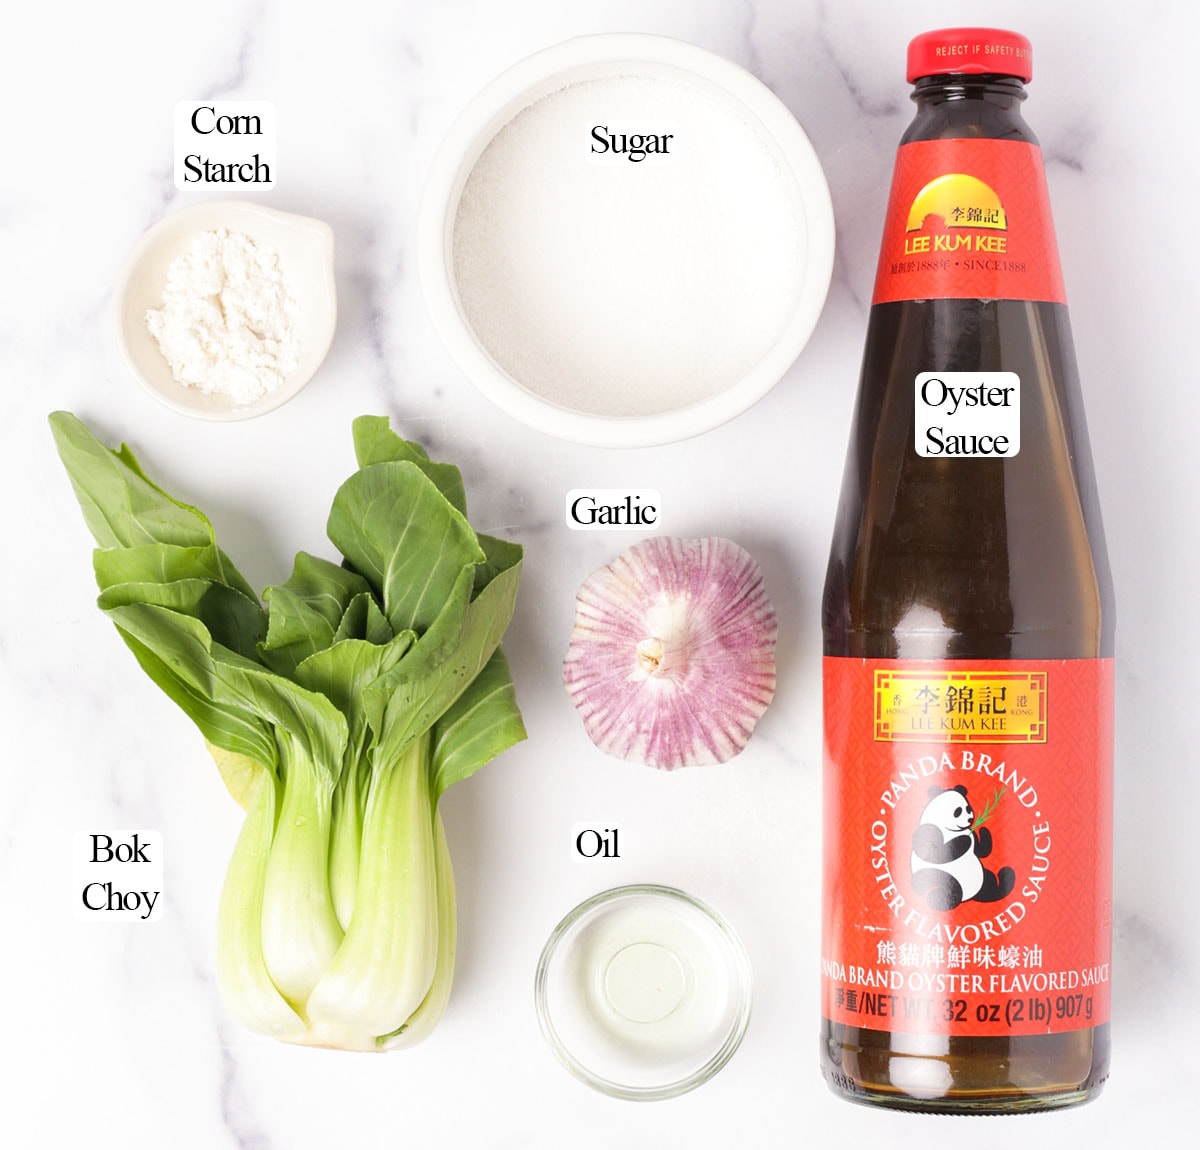 Ingredients for bok choy with oyster sauce.